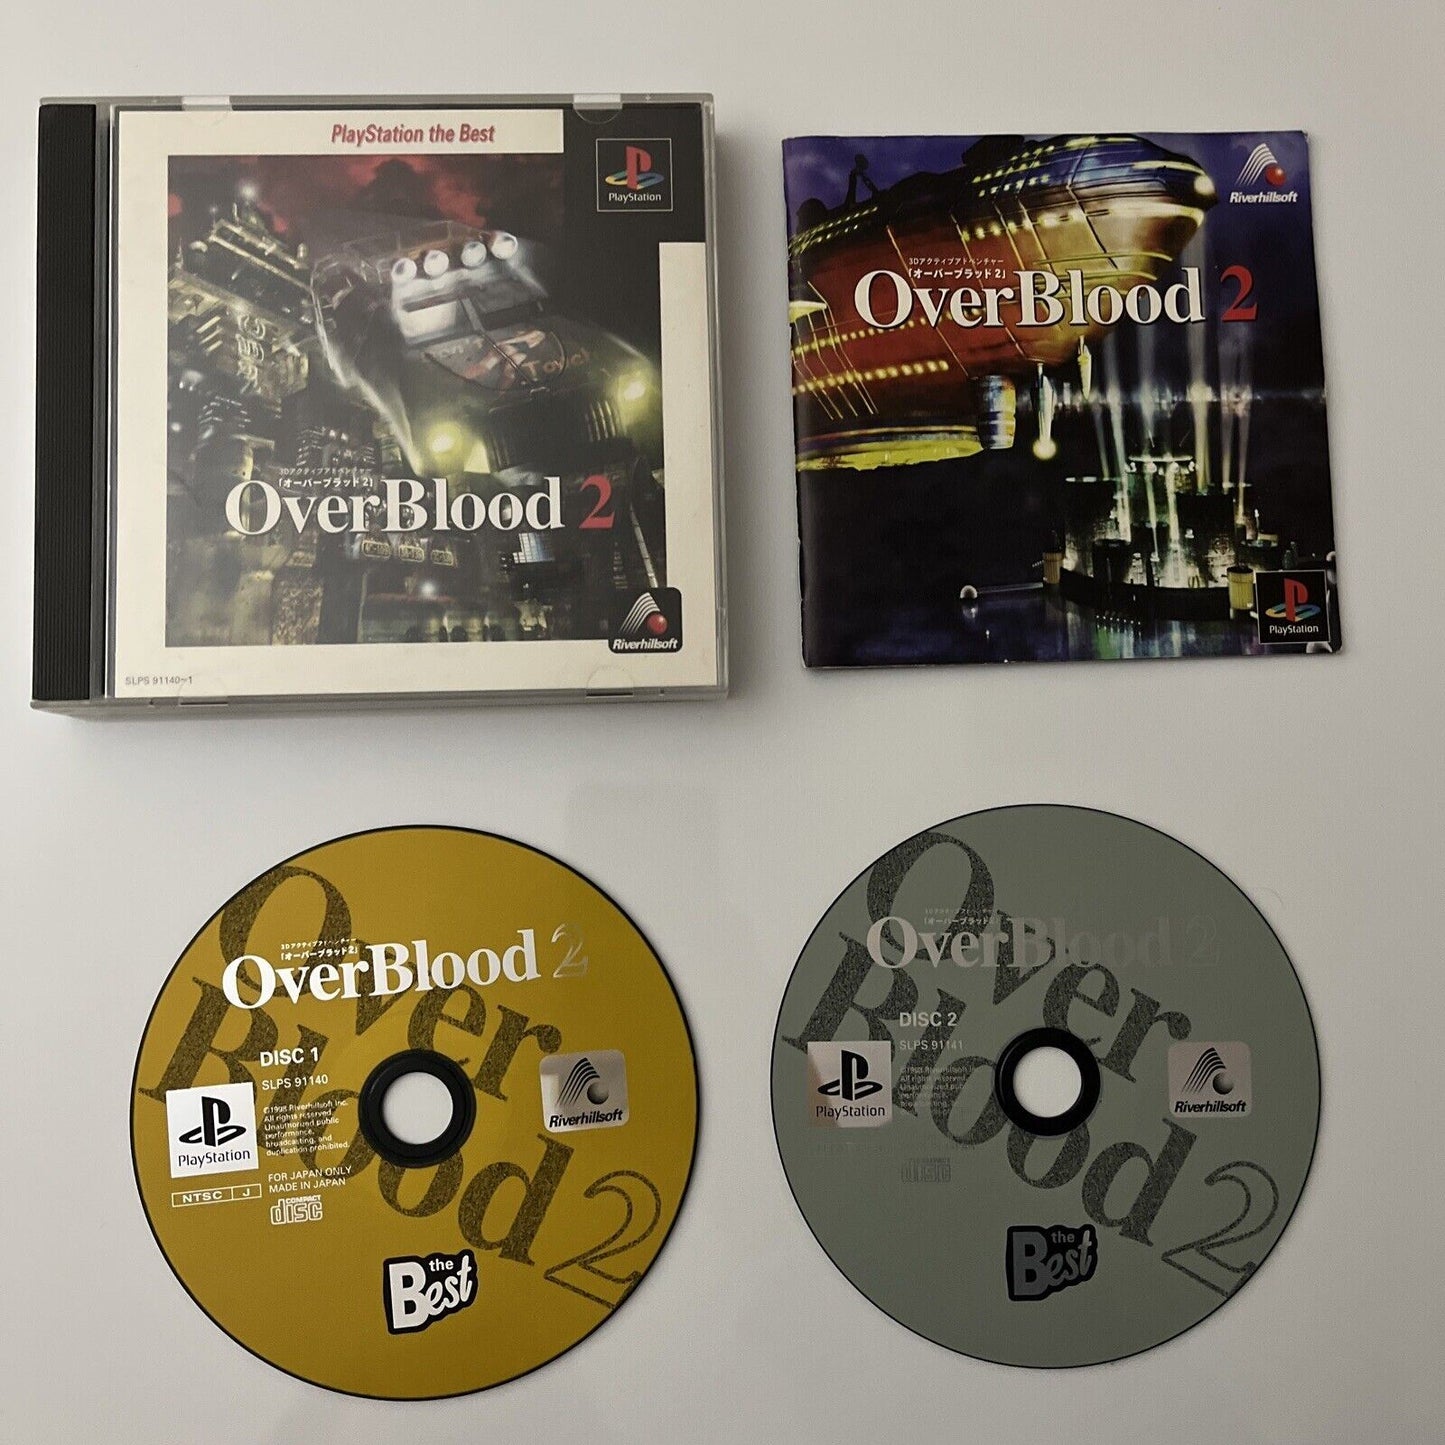 Overblood 2 - Sony PlayStation PS1 NTSC-J JAPAN Survival Horror 1997 Game